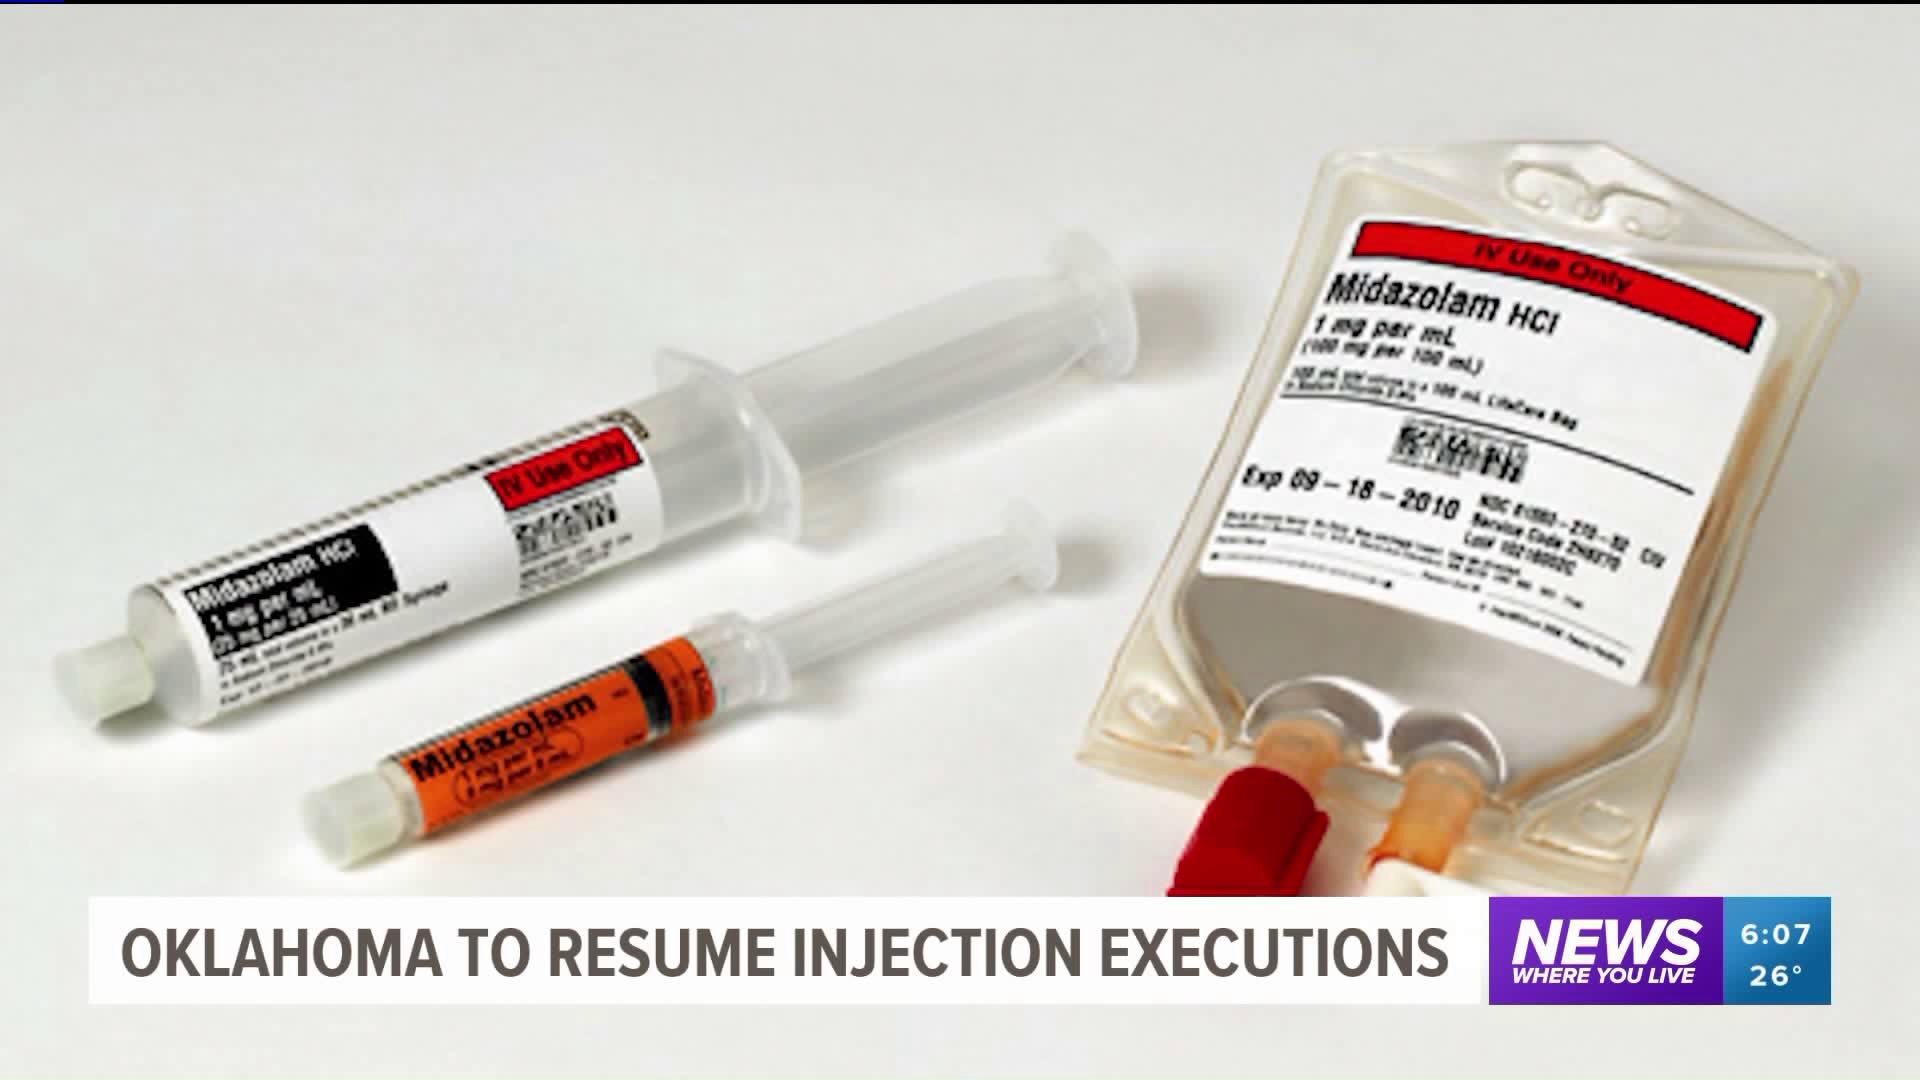 Oklahoma to Resume Injection Executions